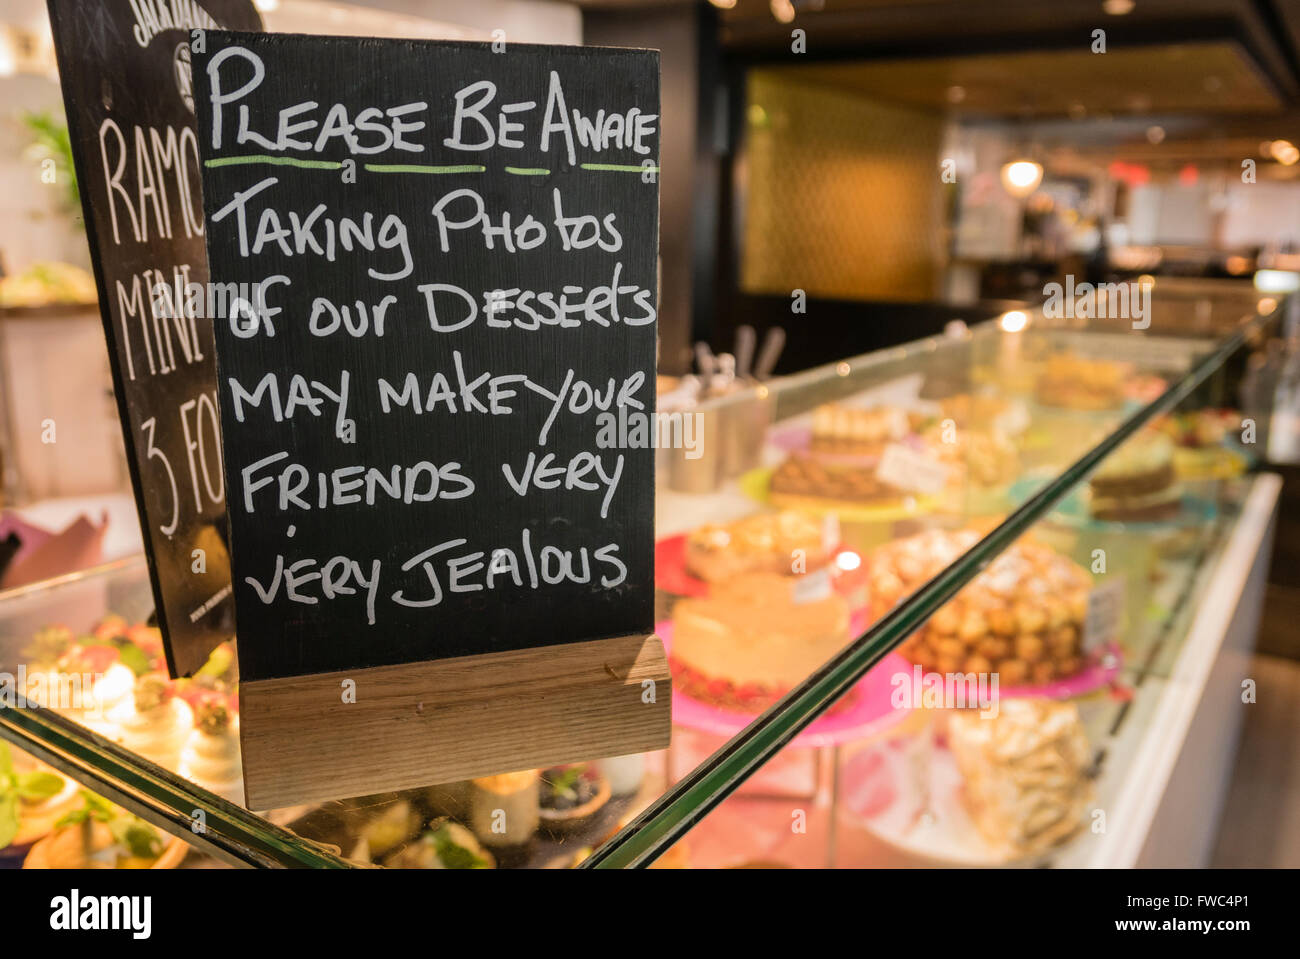 Sign at a restaurant warning customers that photographs of desserts may make your friends very jealous Stock Photo